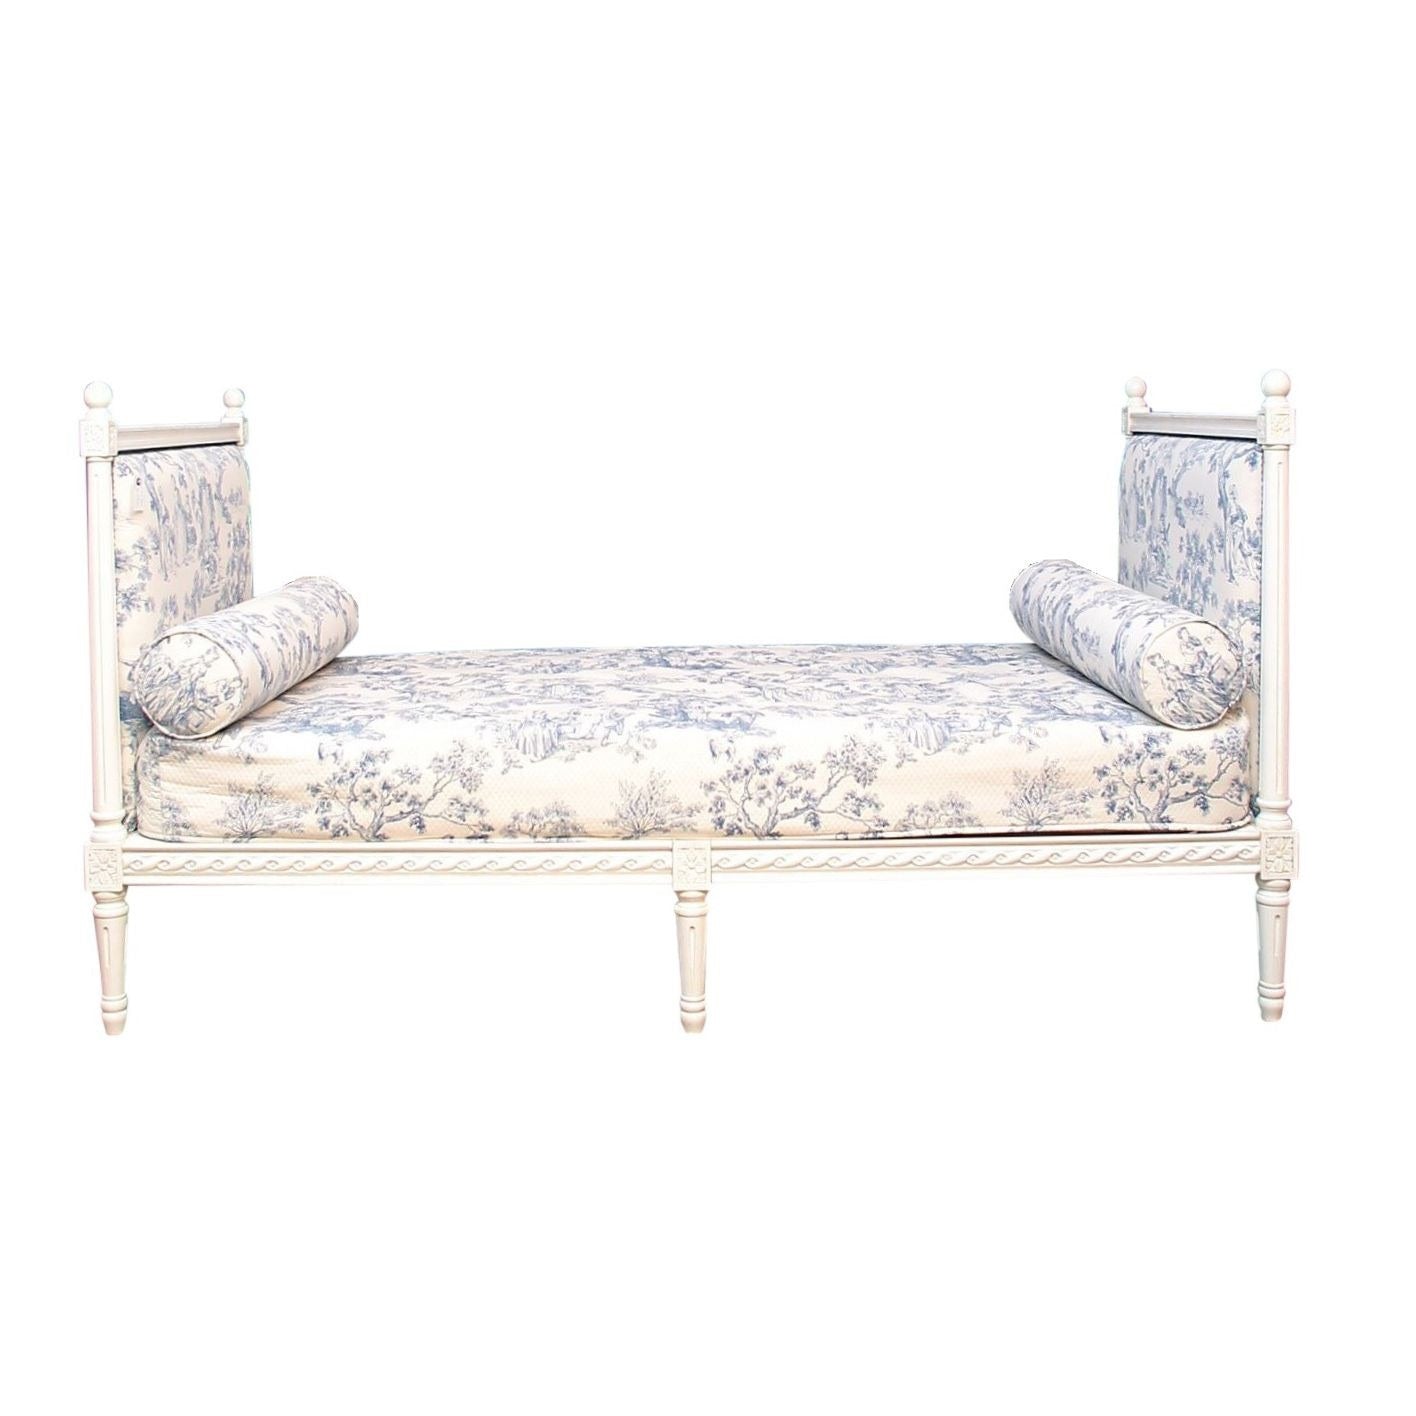 Gustavian Style Day Bed - detail